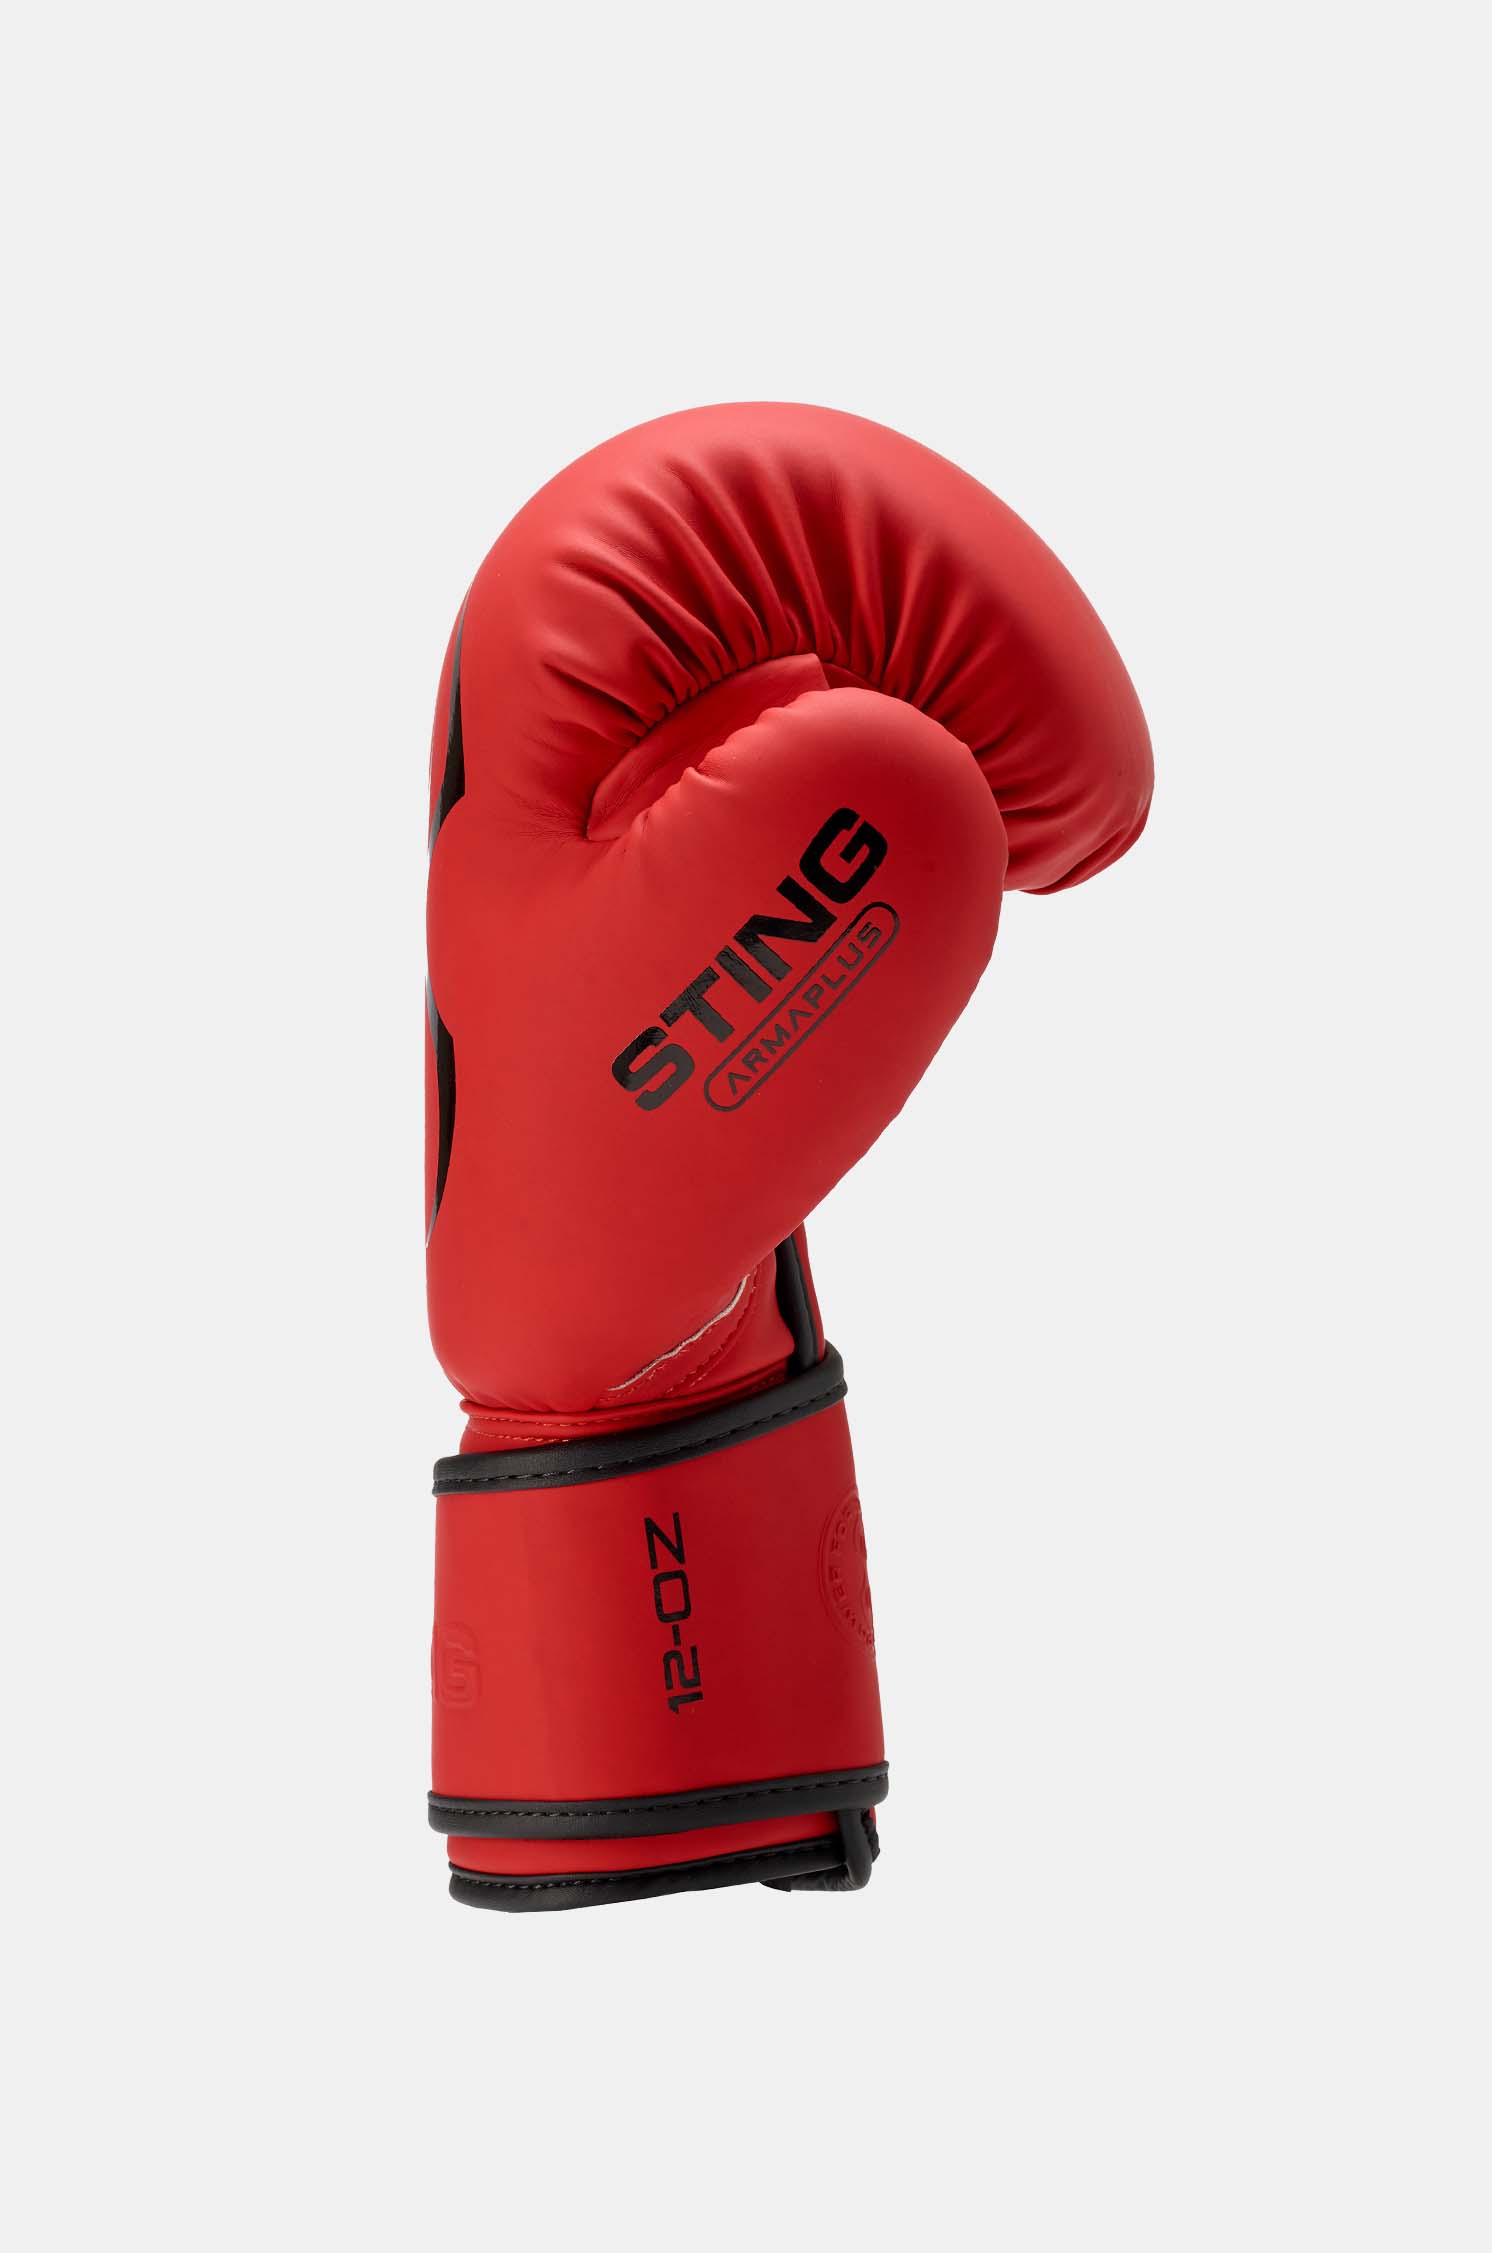 Armaplus Boxing Gloves-Red – STING USA